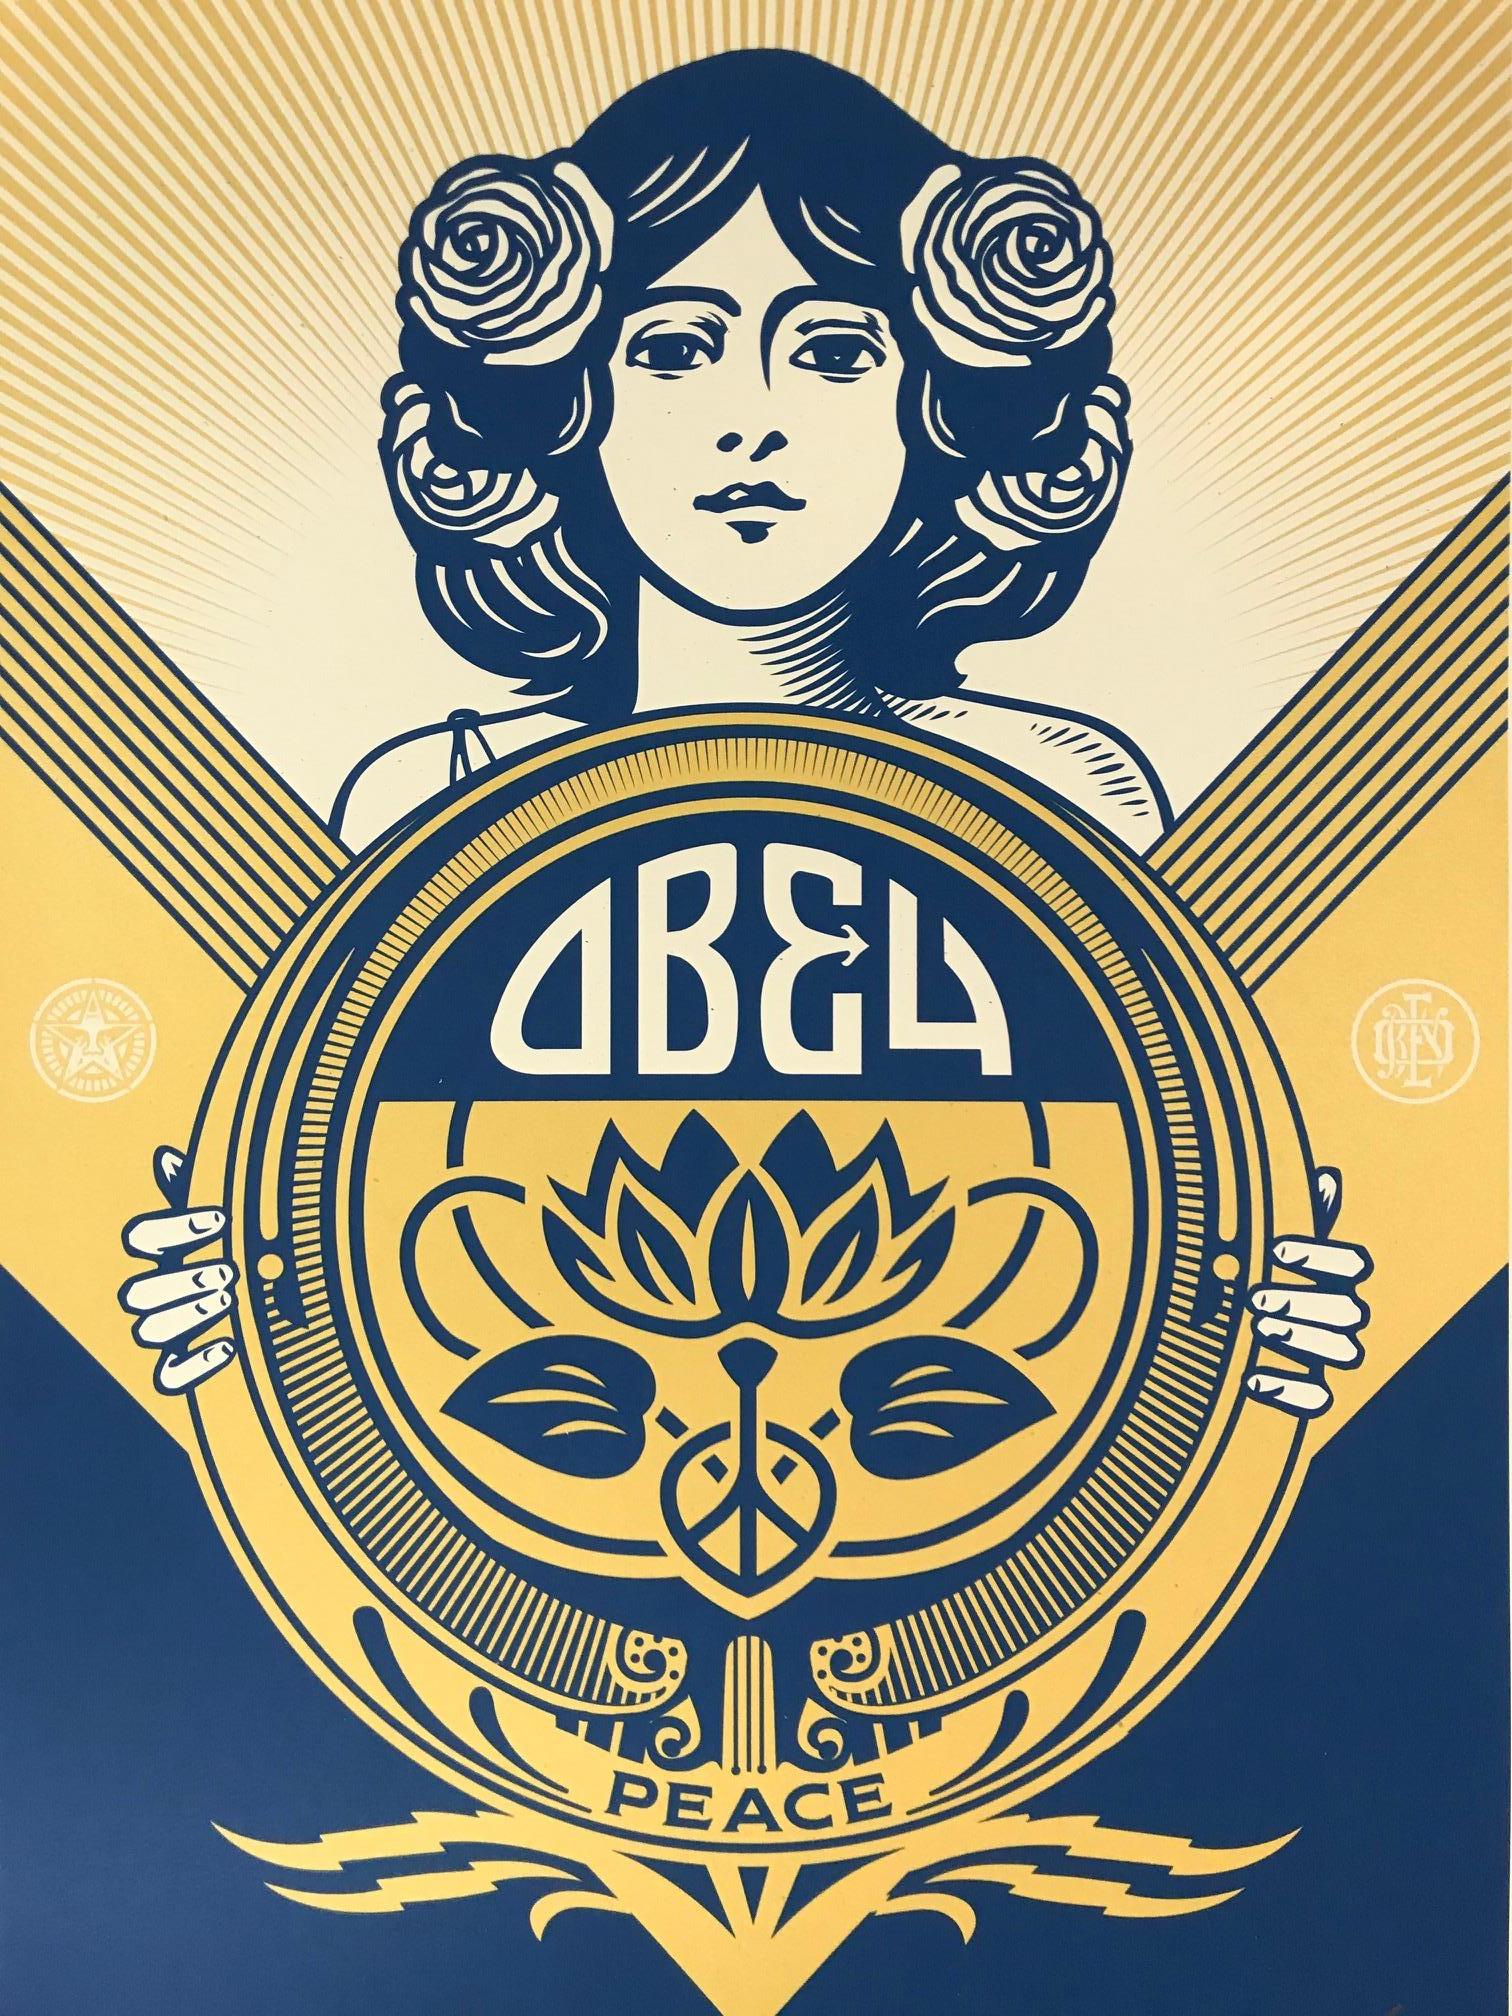 Obey Giant Golden Peace Girl Holiday Print 2016 Shepard Fairey Signed  2